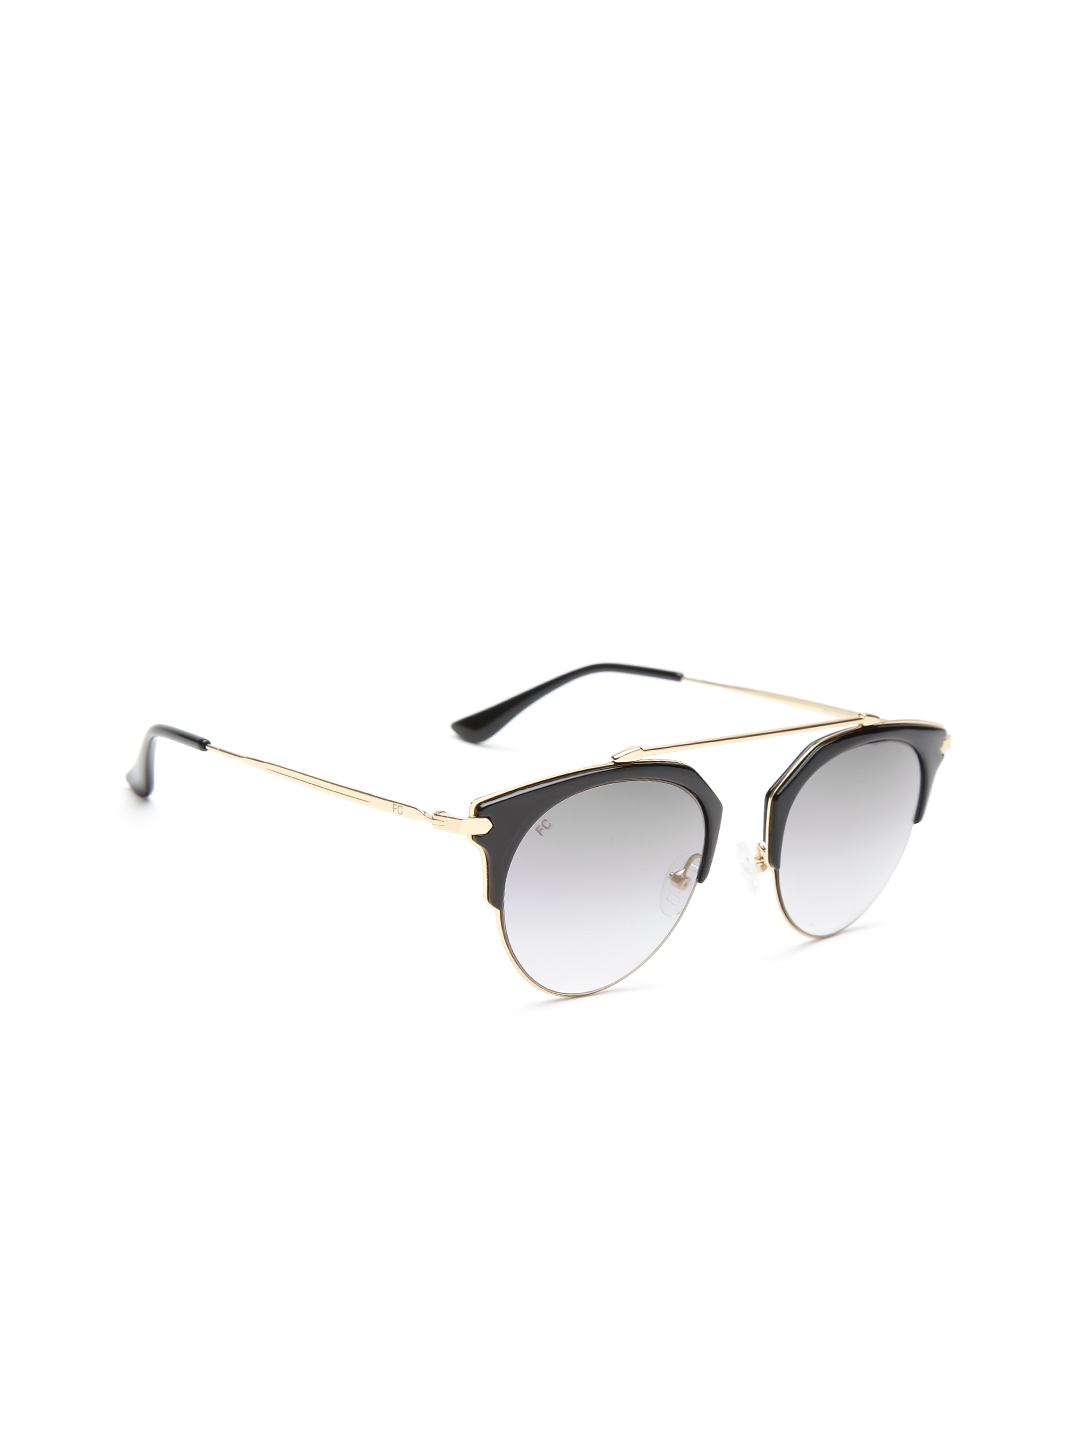 French Connection Women Clubmaster Sunglasses FC7377 C1